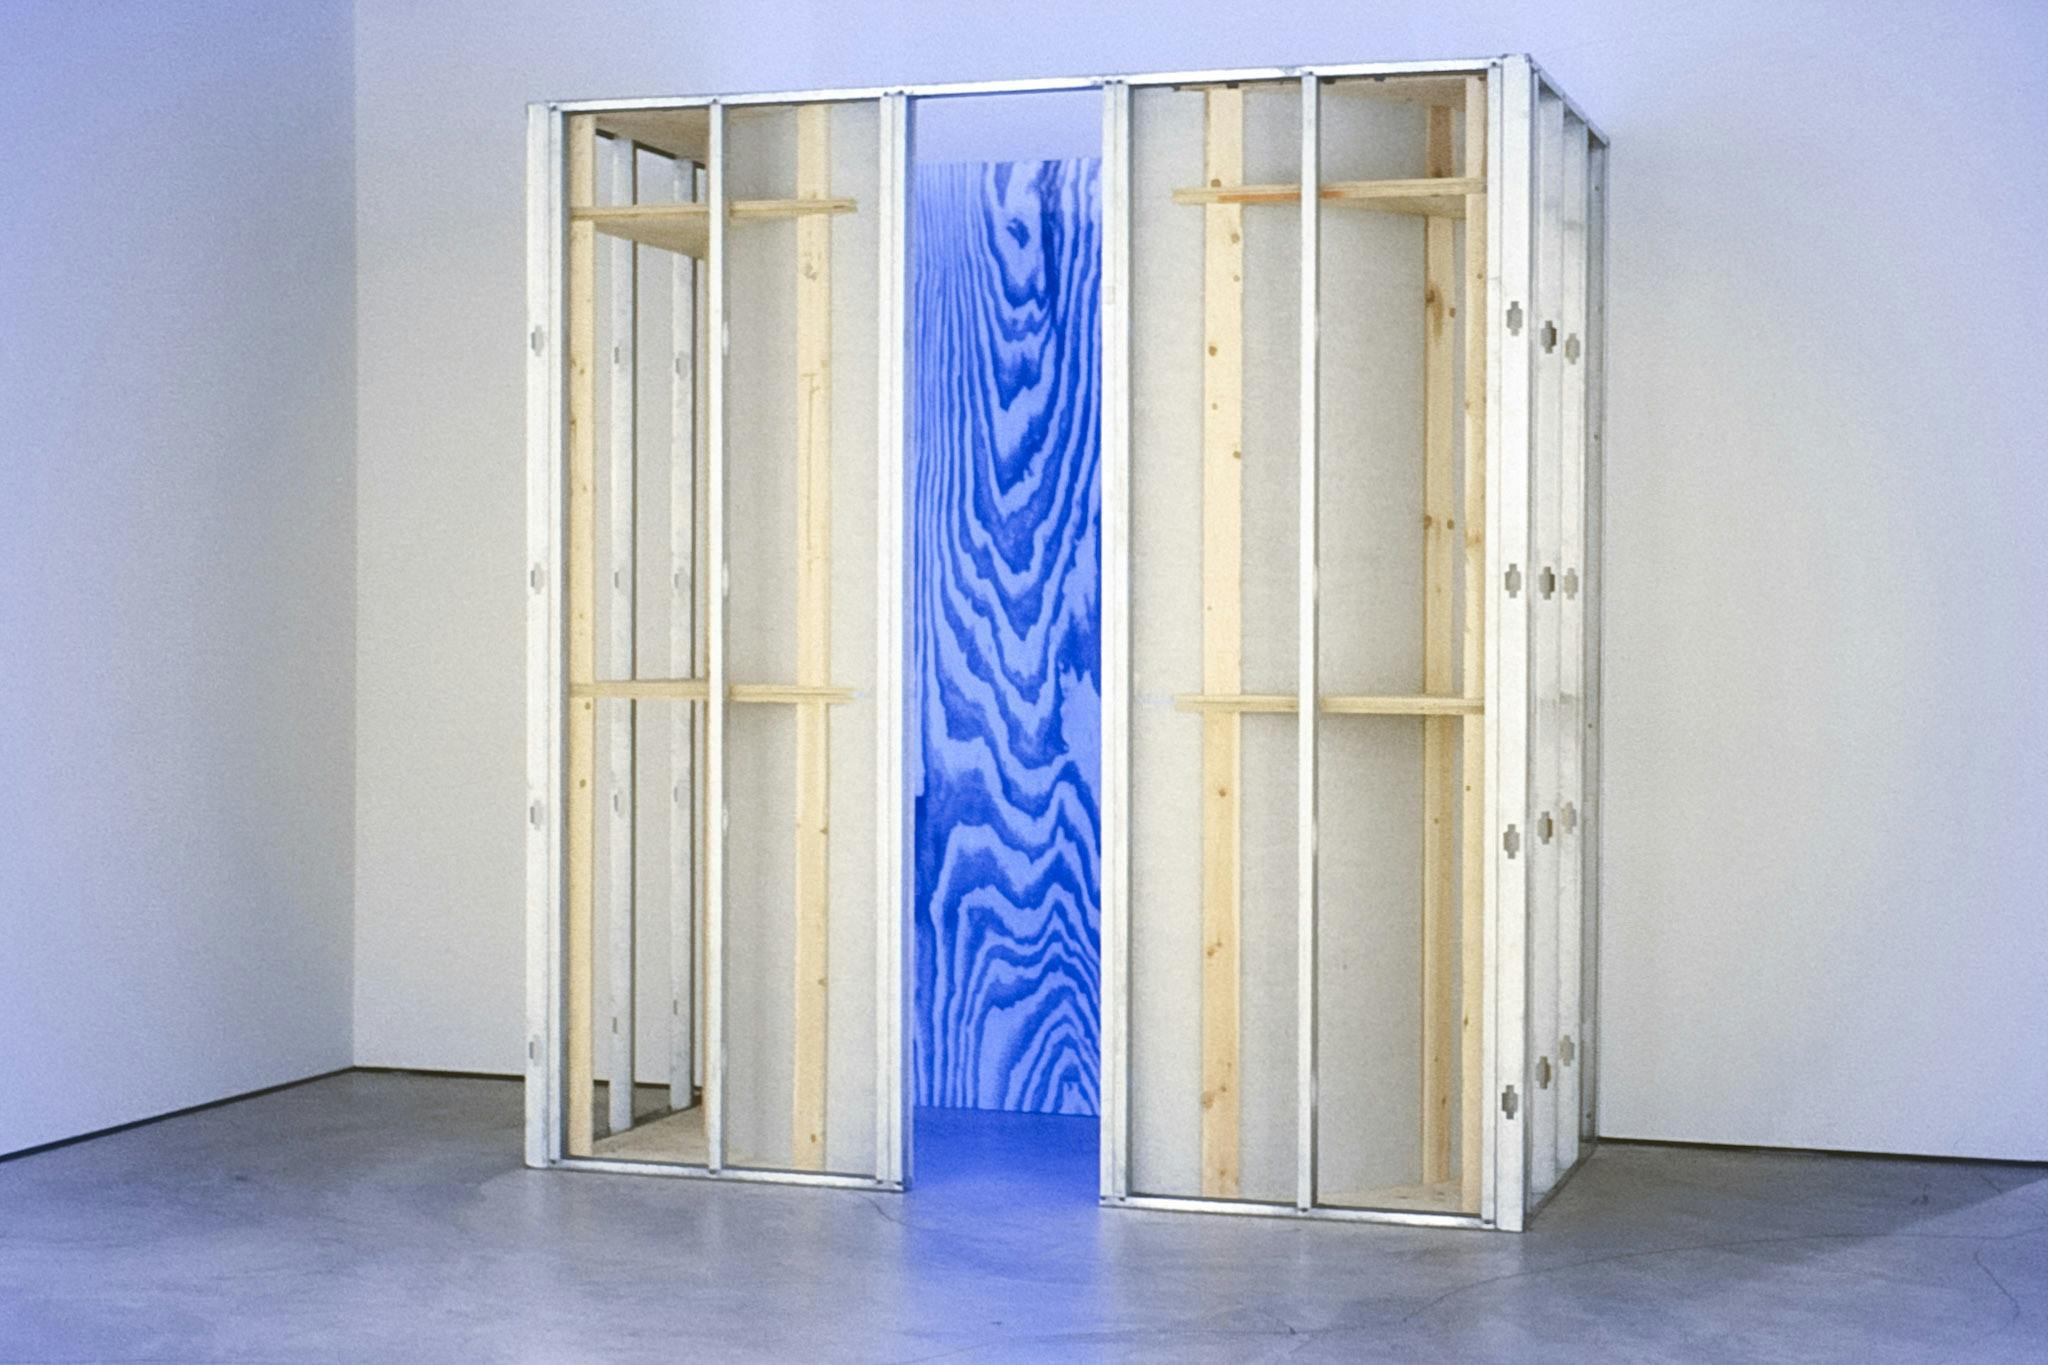 A large sculpture in a gallery space. It is made of a wood and metal structure and shows an enlarged wood pattern in the interior. This inside part is lit in bright-blue.